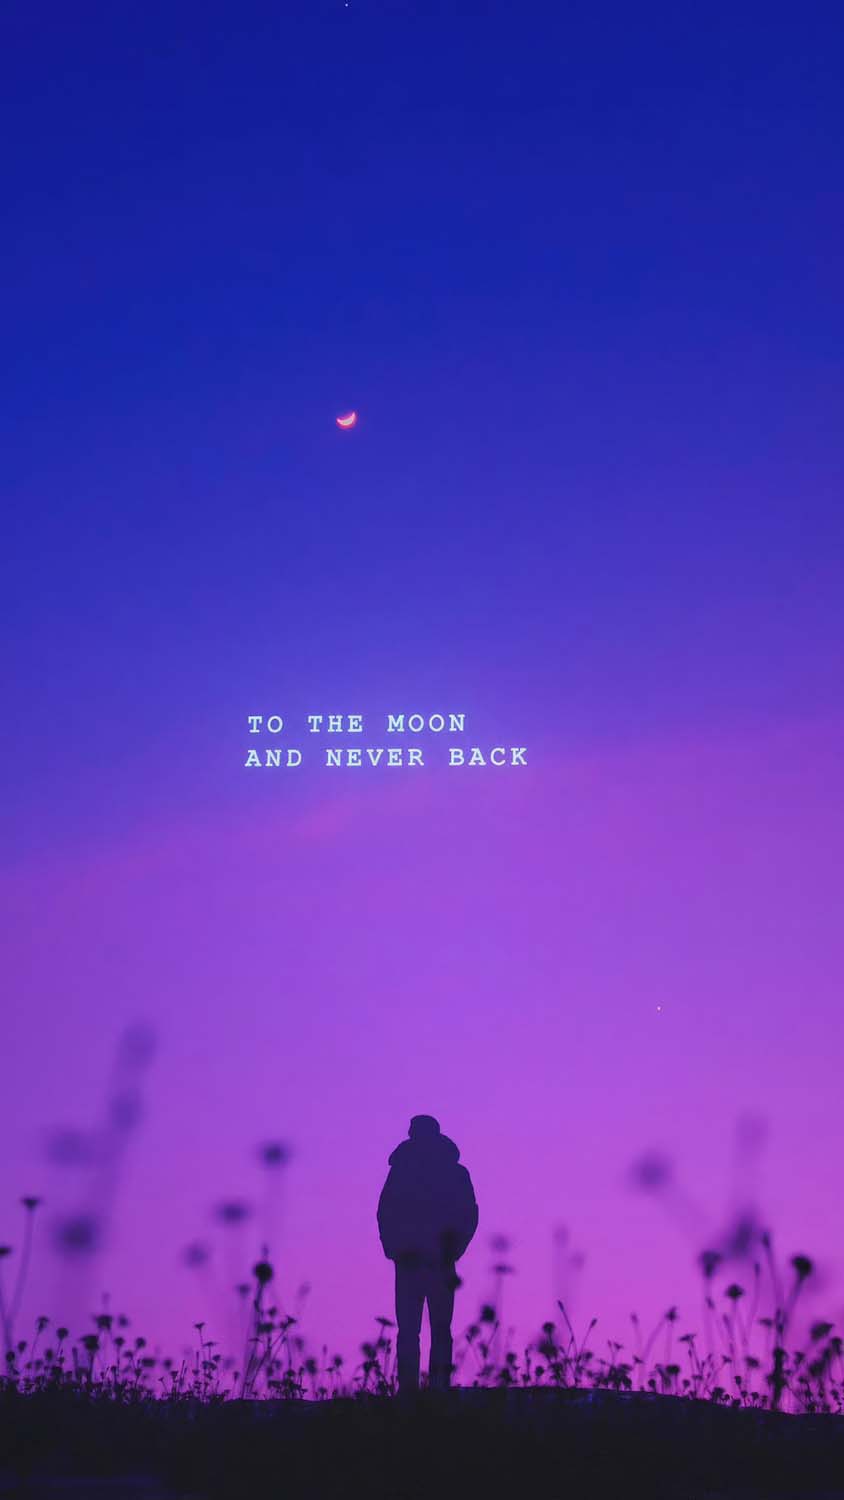 To the moon and never back iPhone Wallpaper